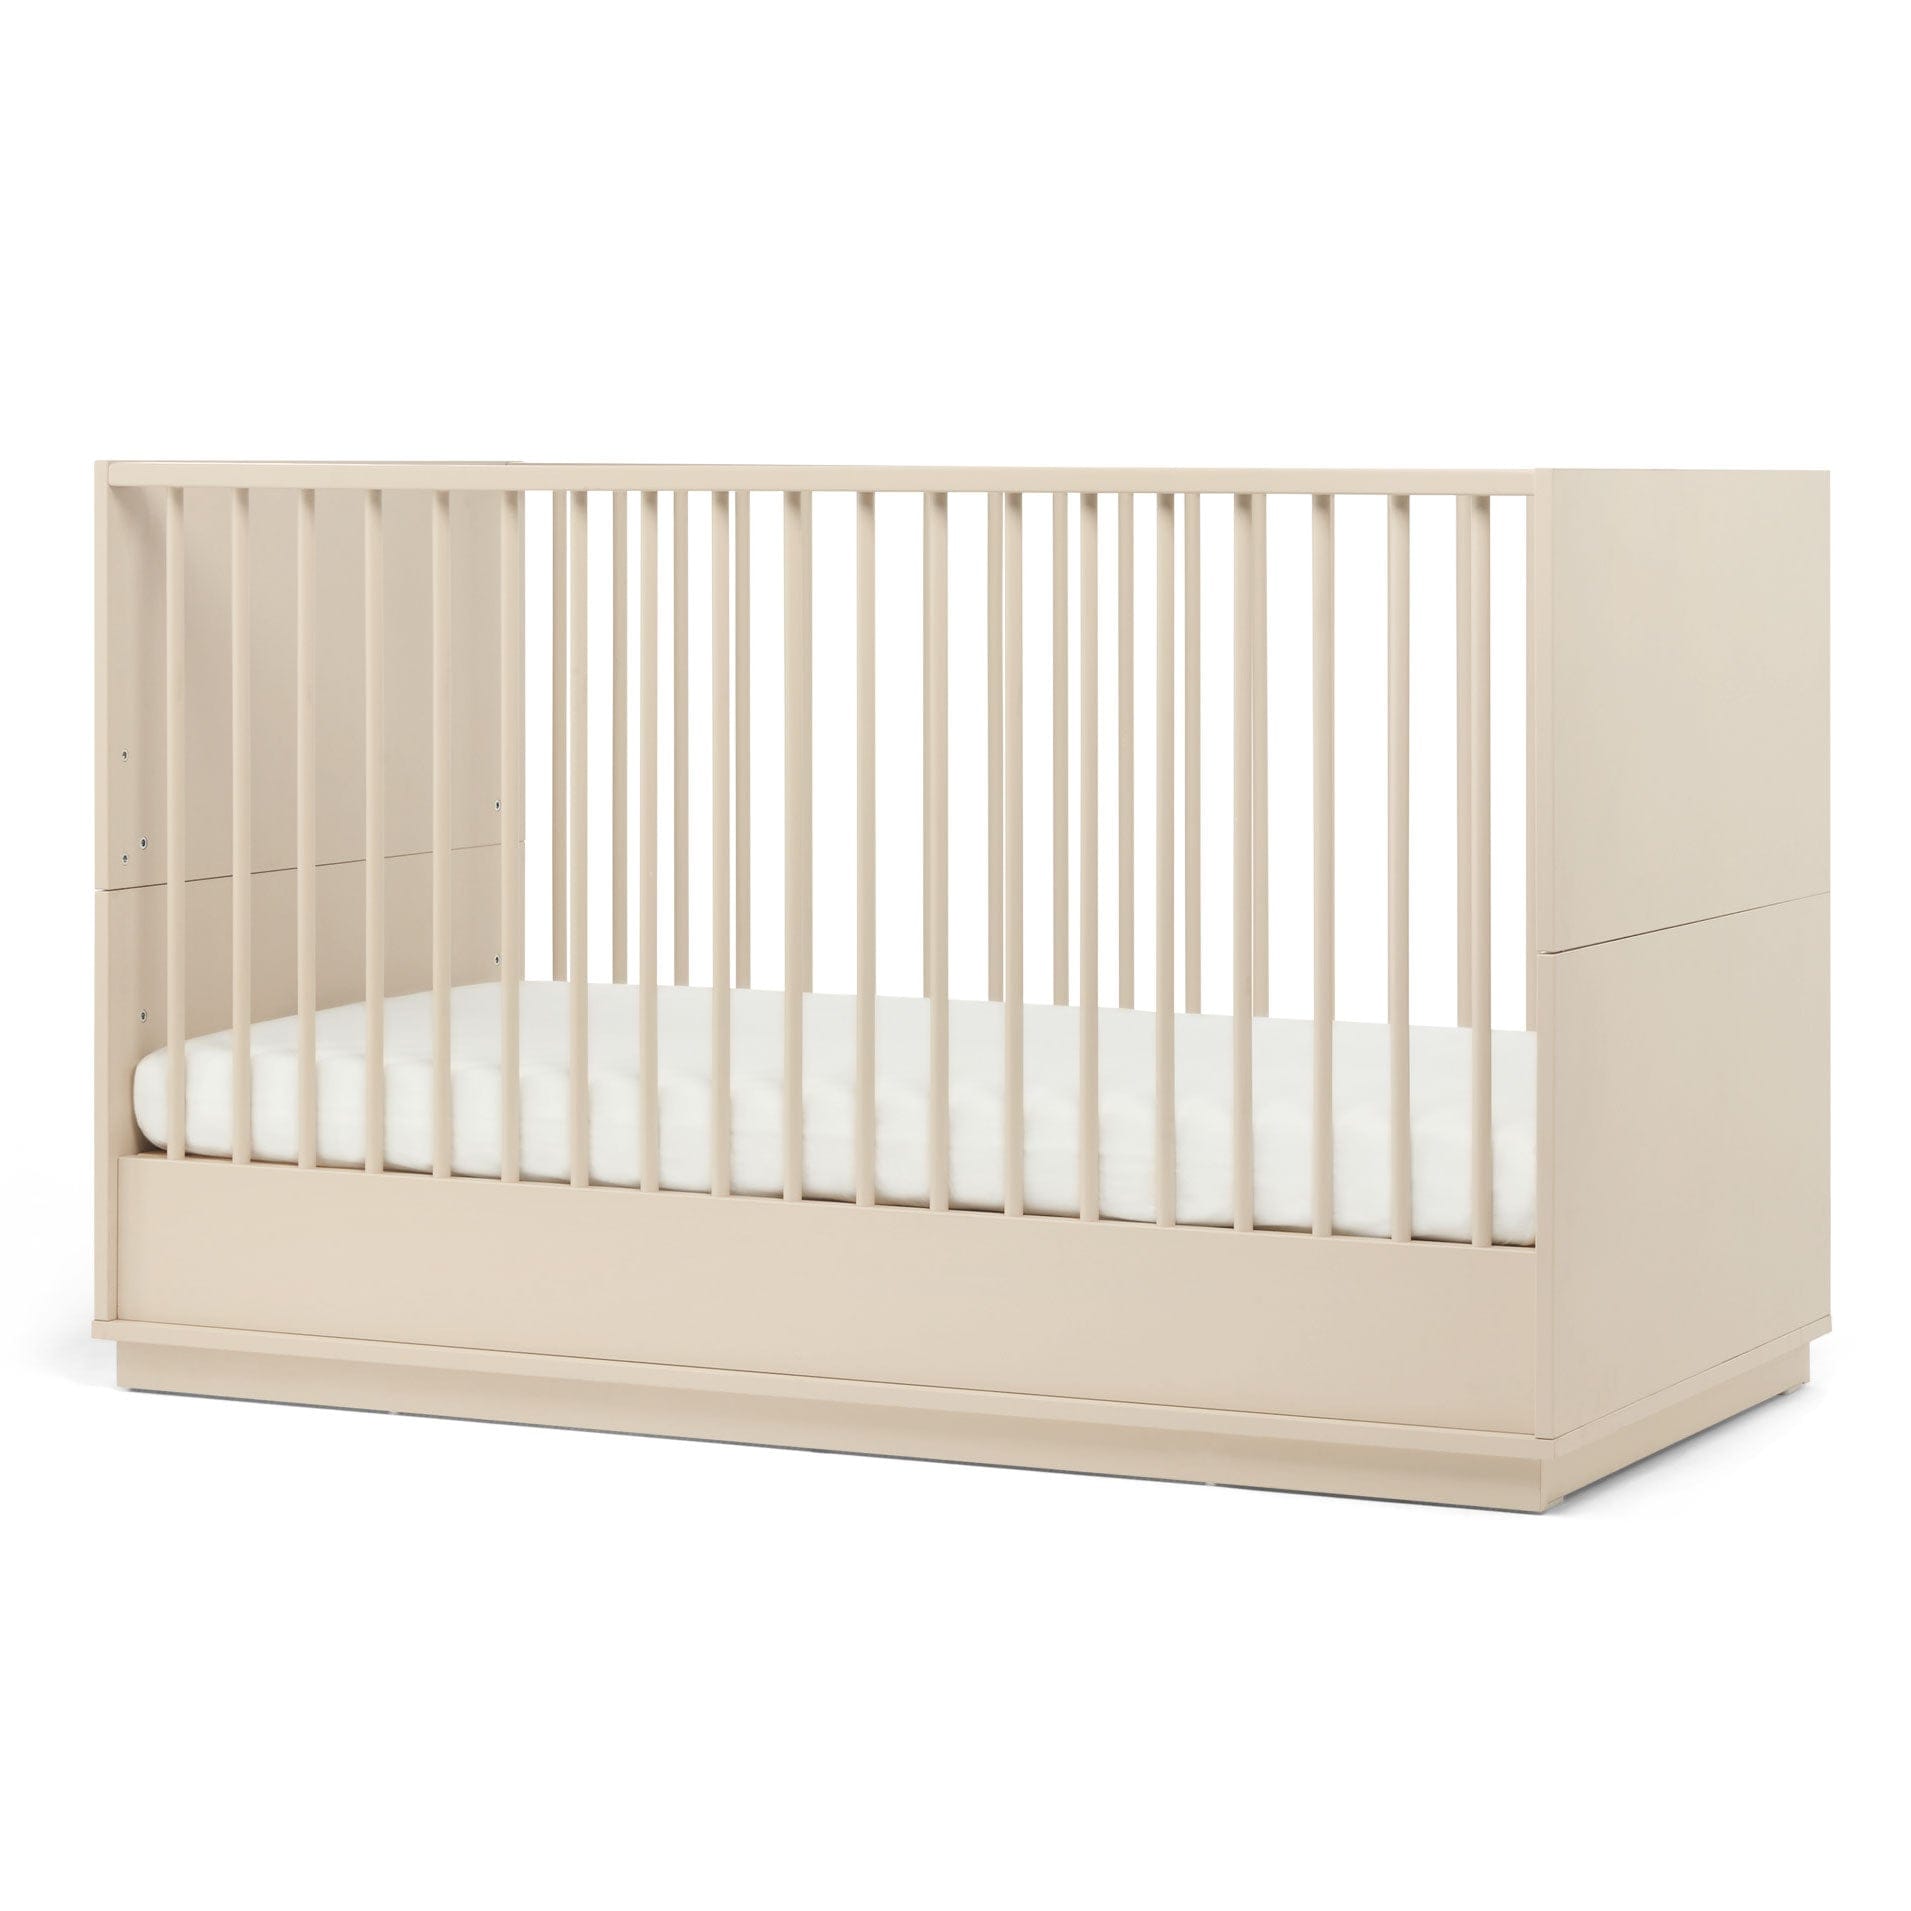 Mamas & Papas Flockton 2 Piece Cotbed Roomset in Cashmere Nursery Room Sets